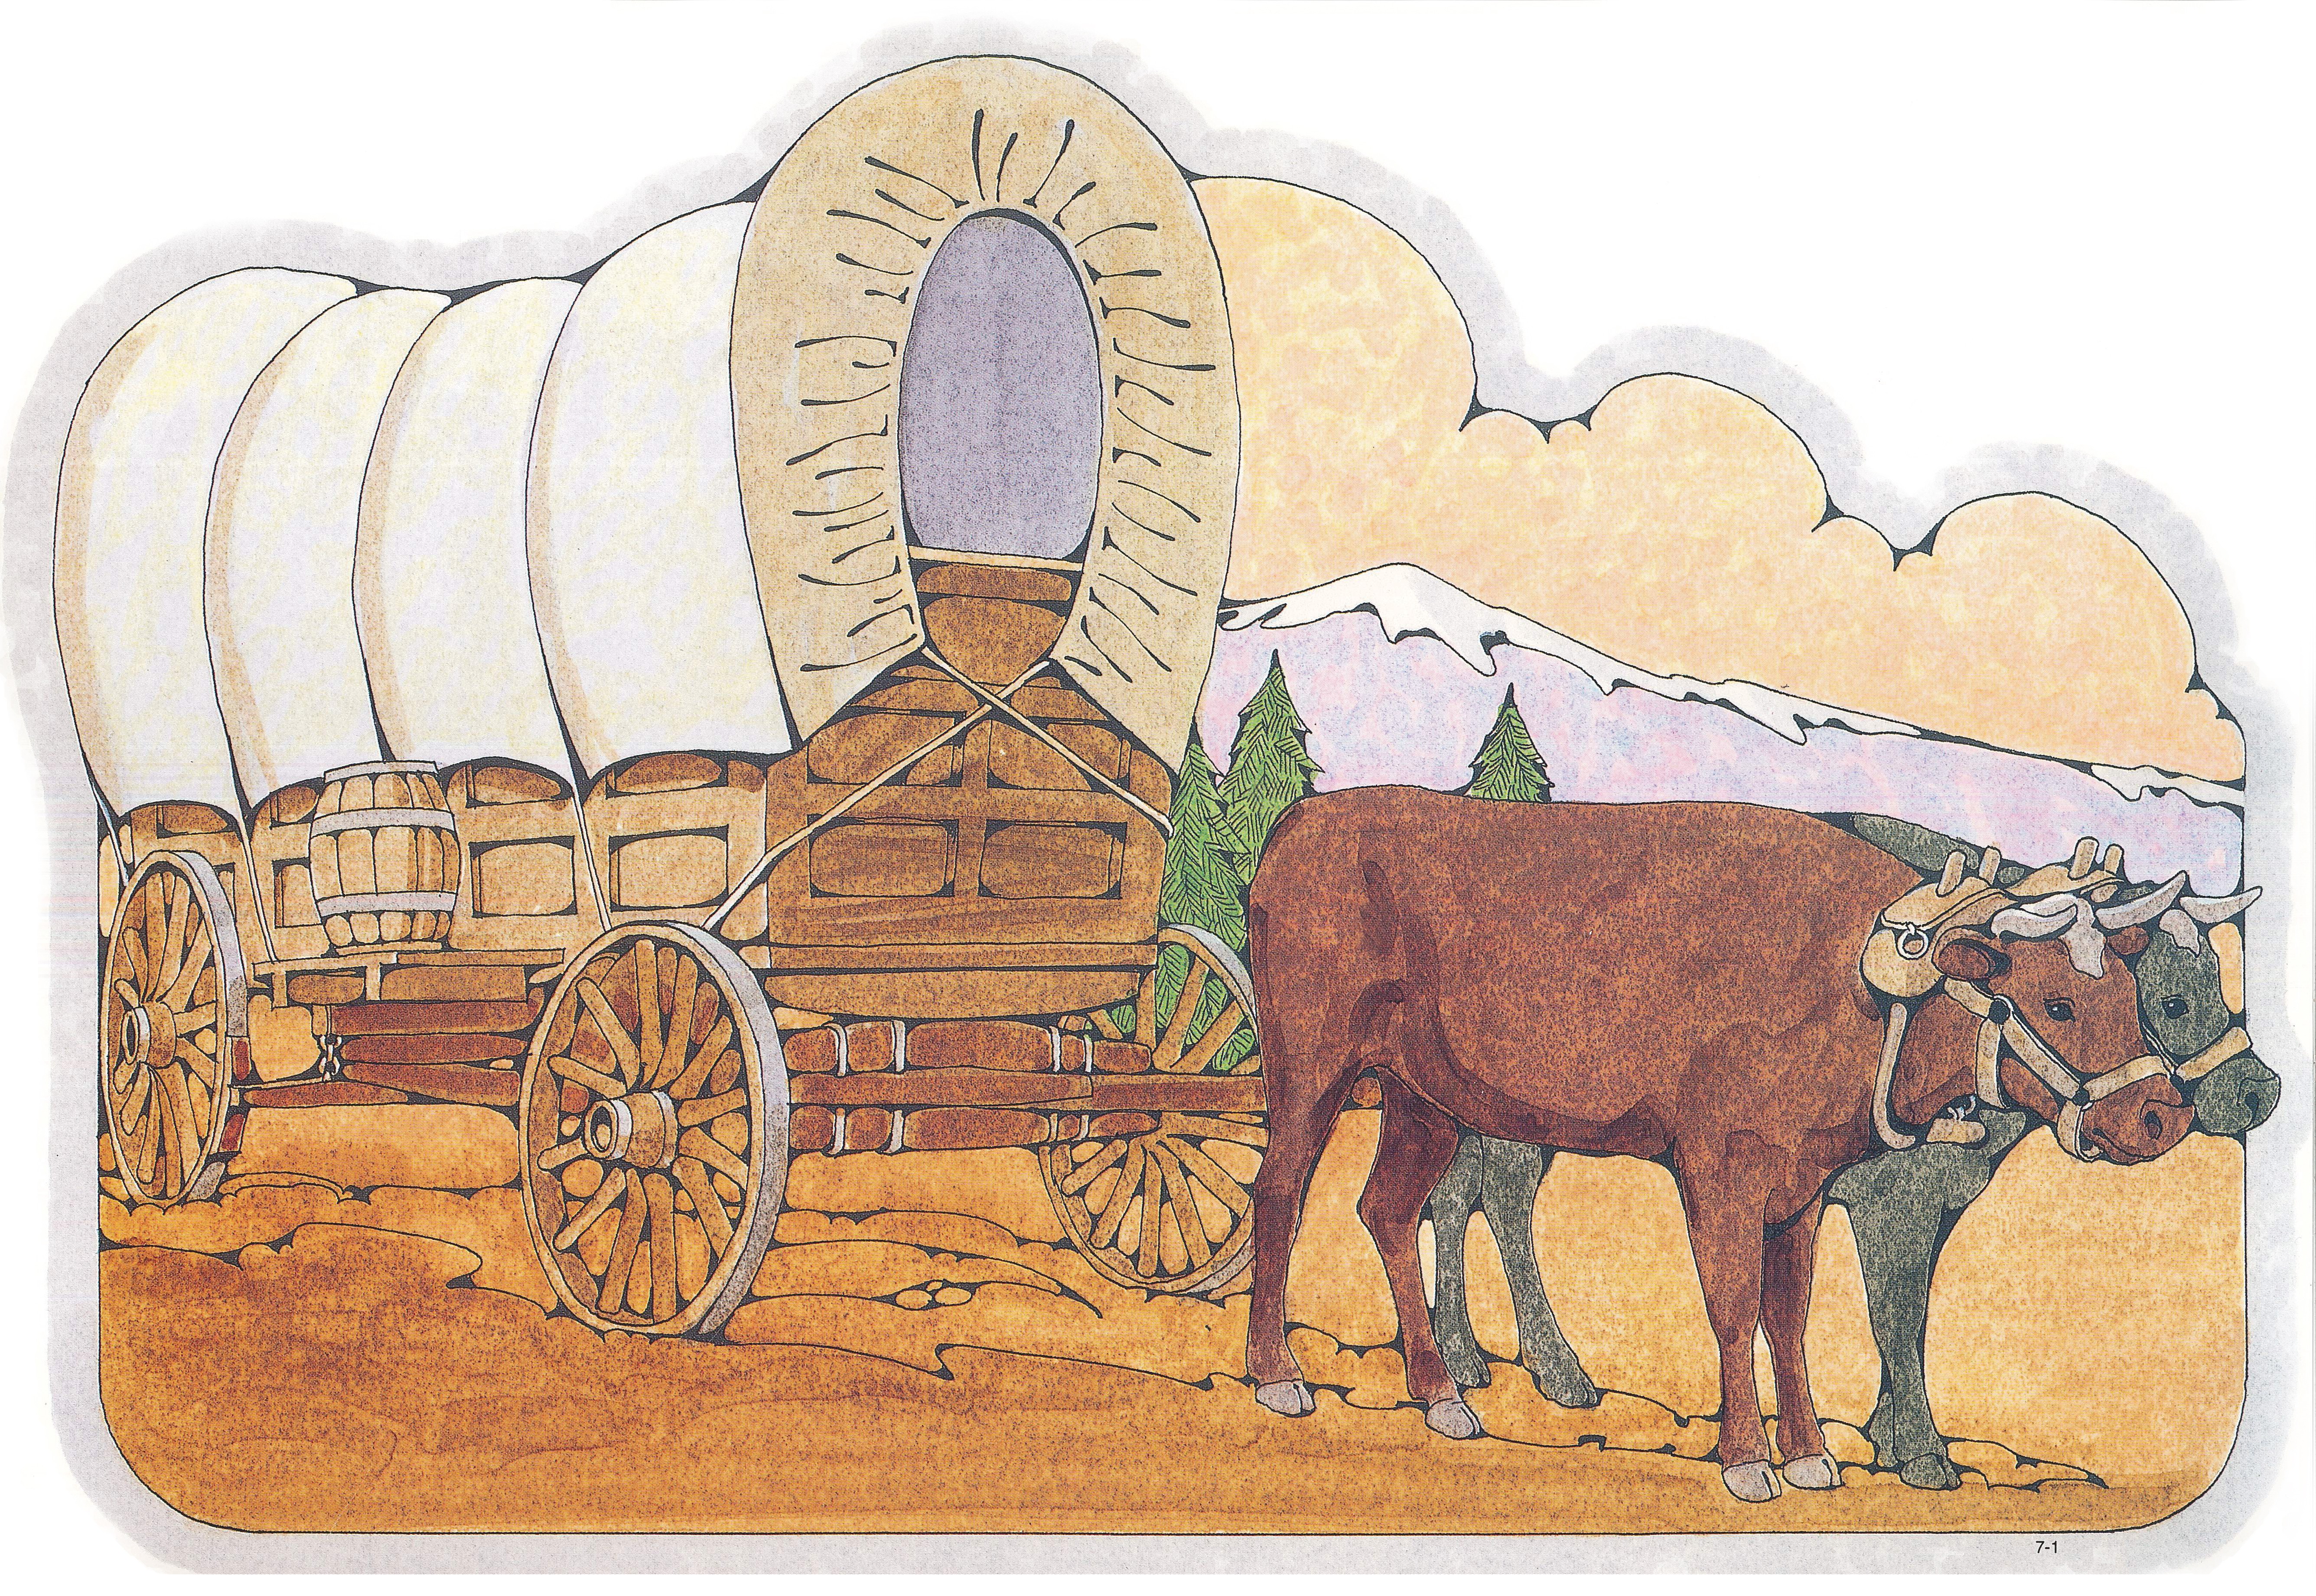 A Primary cutout of a covered wagon on a dirt trail getting pulled by black and brown oxen.